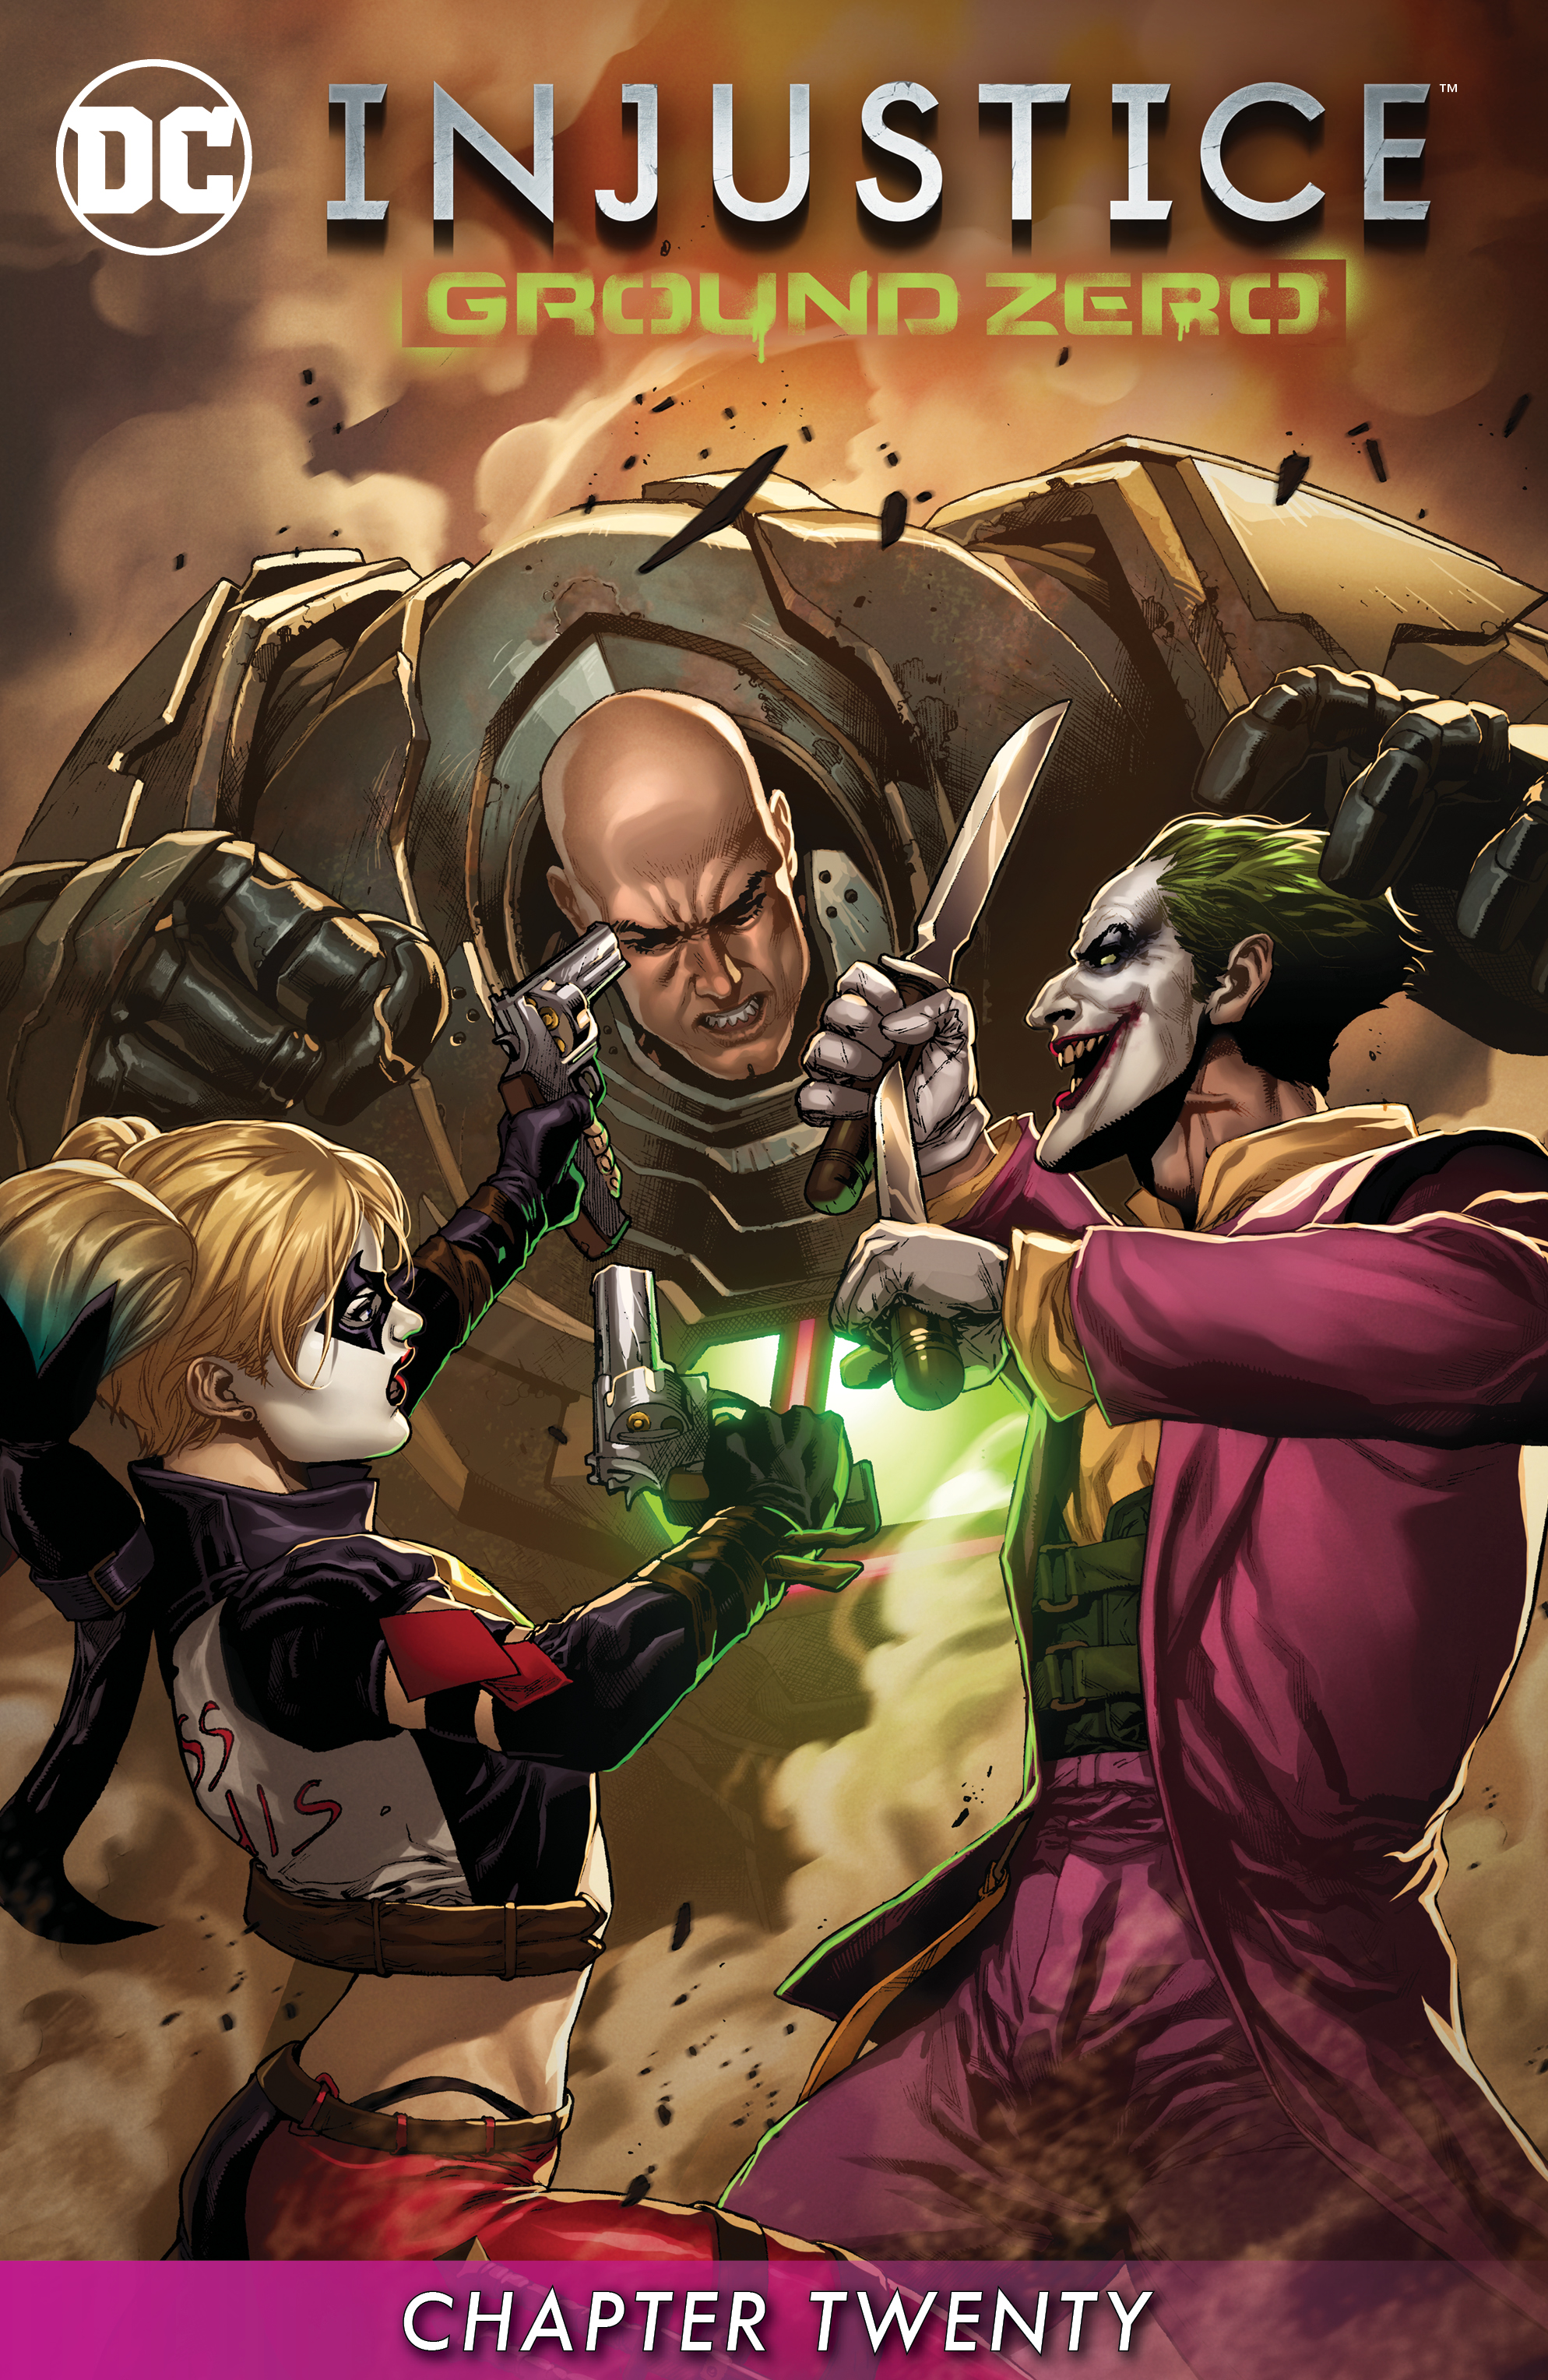 Injustice: Ground Zero #20 preview images